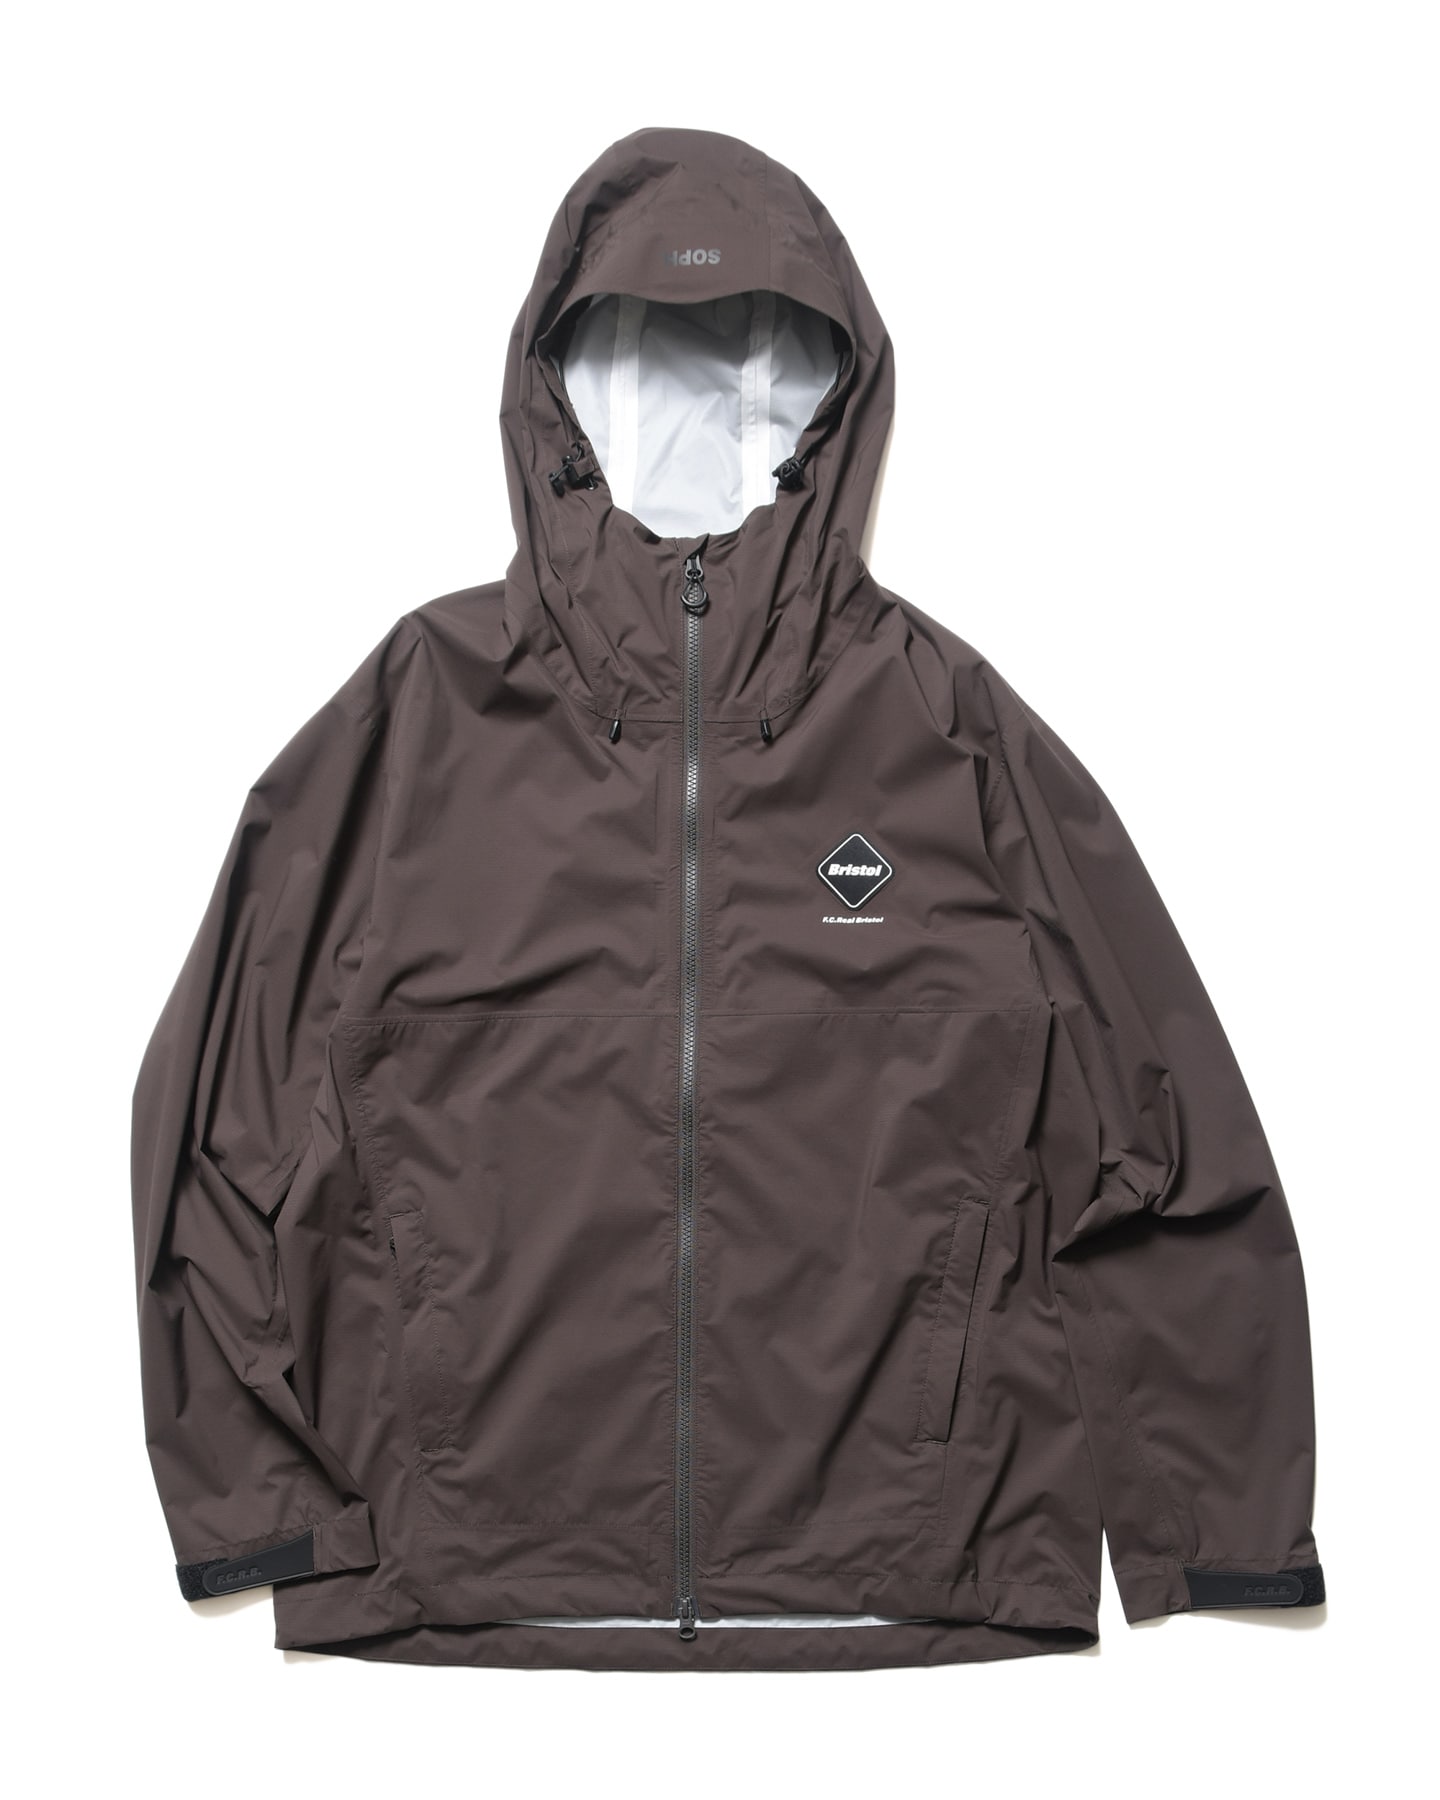 SOPH. | ALL WEATHER JACKET(XL BROWN):